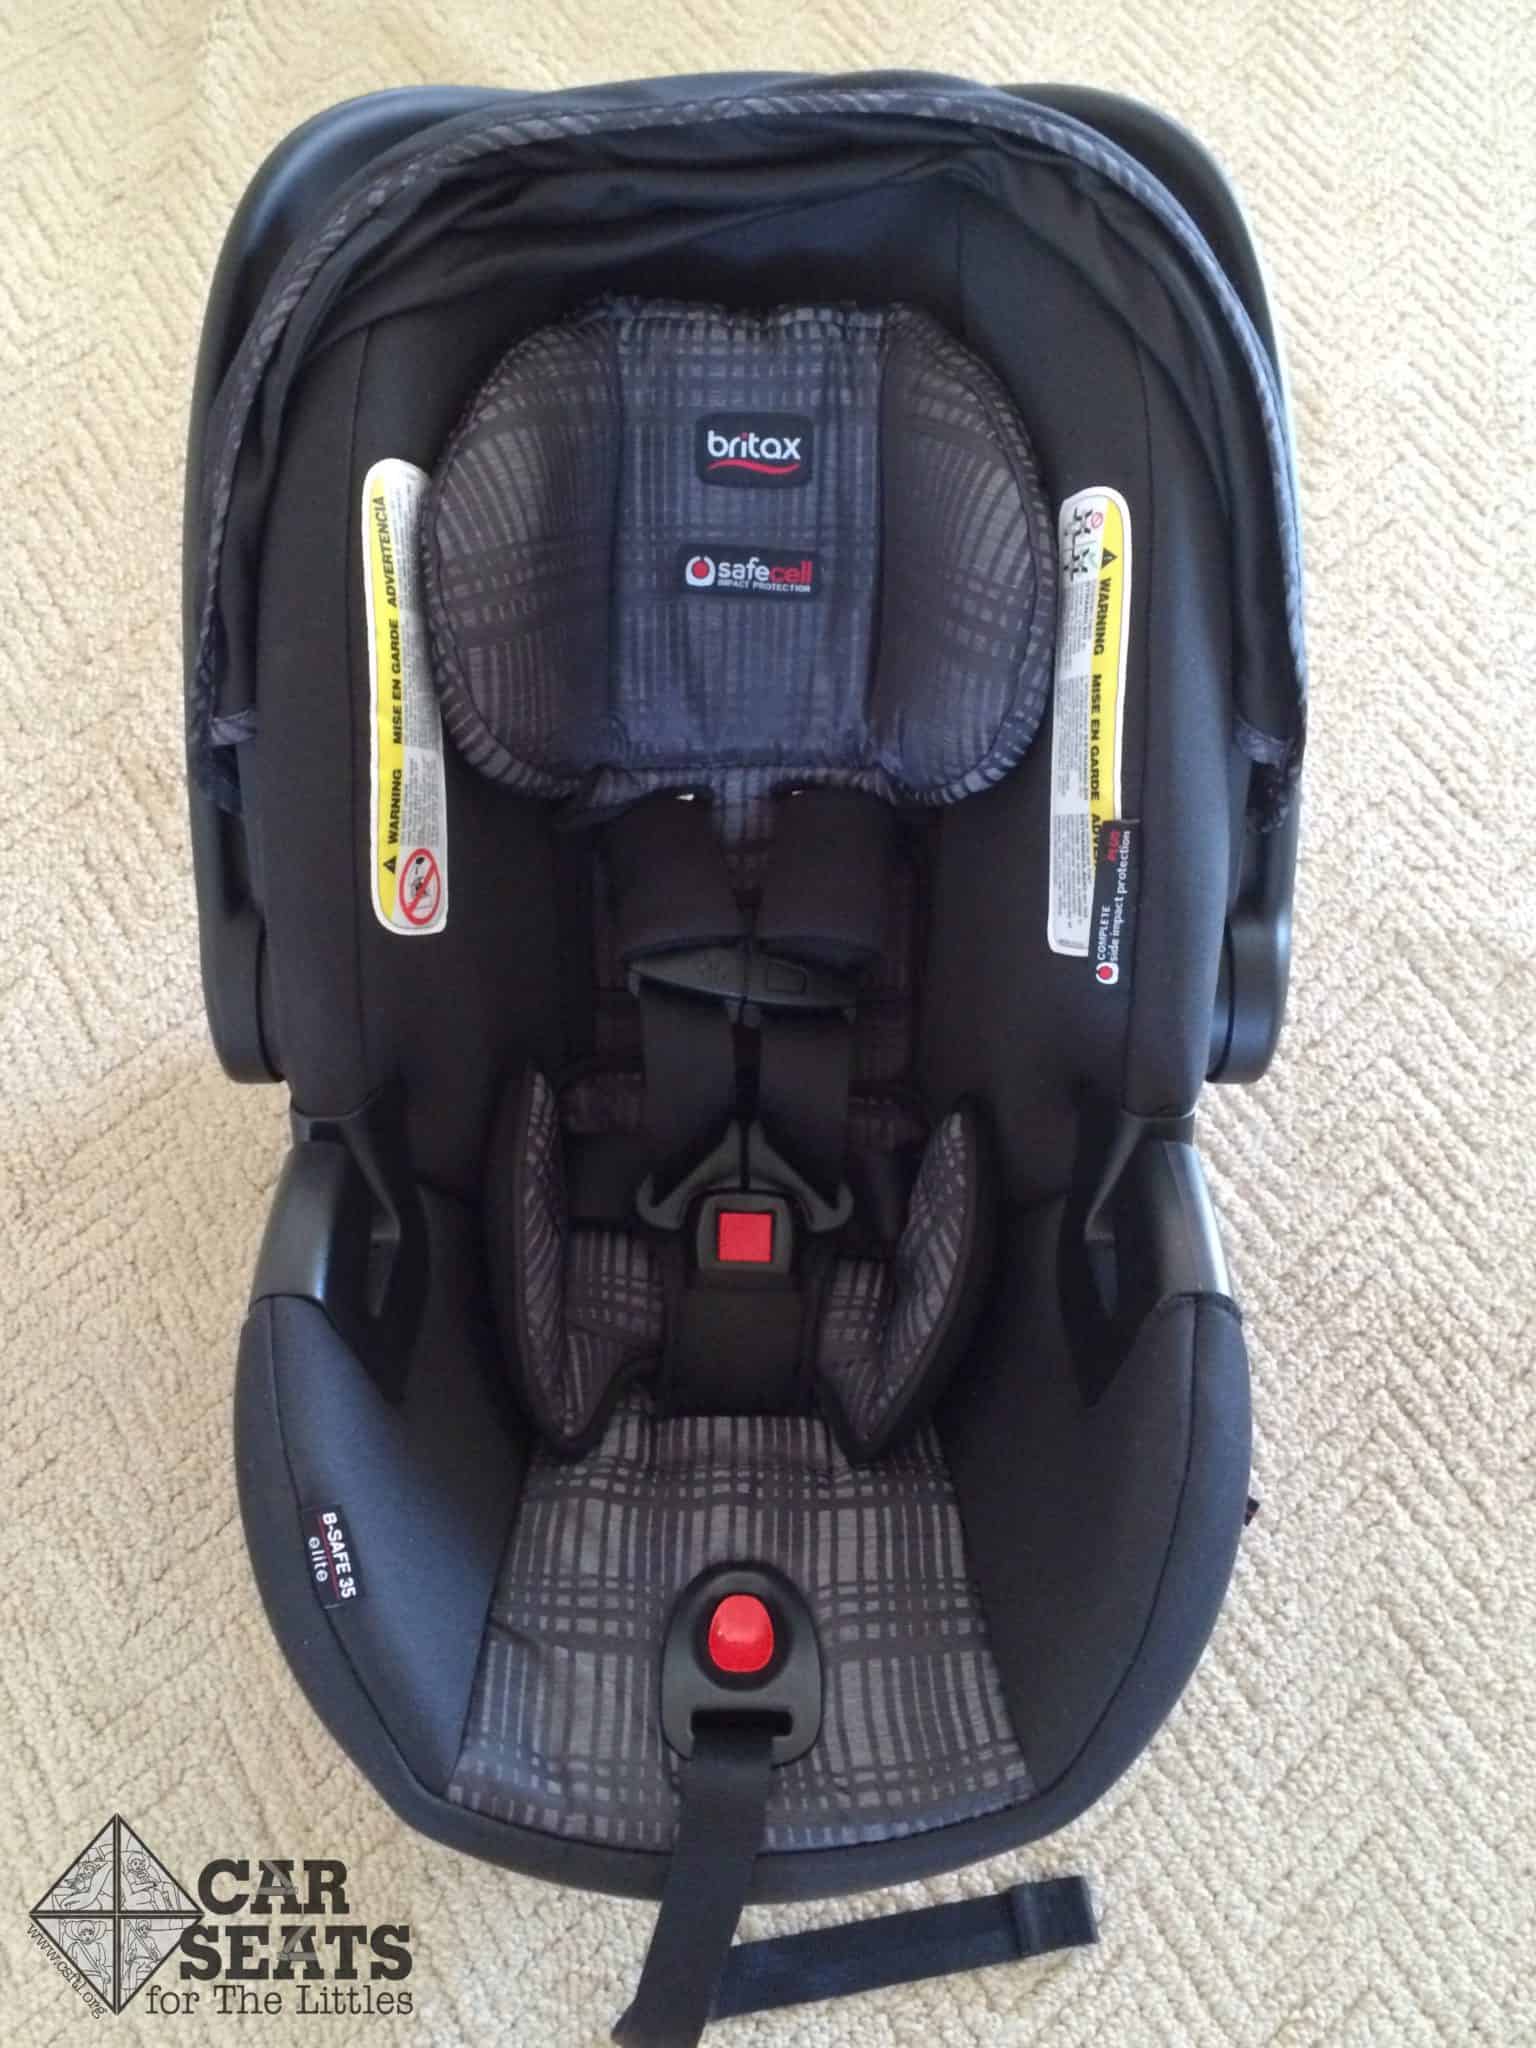 Britax B Safe 35 Elite Review Car Seats For The Littles - Do You Need An Infant Insert For Britax Car Seat